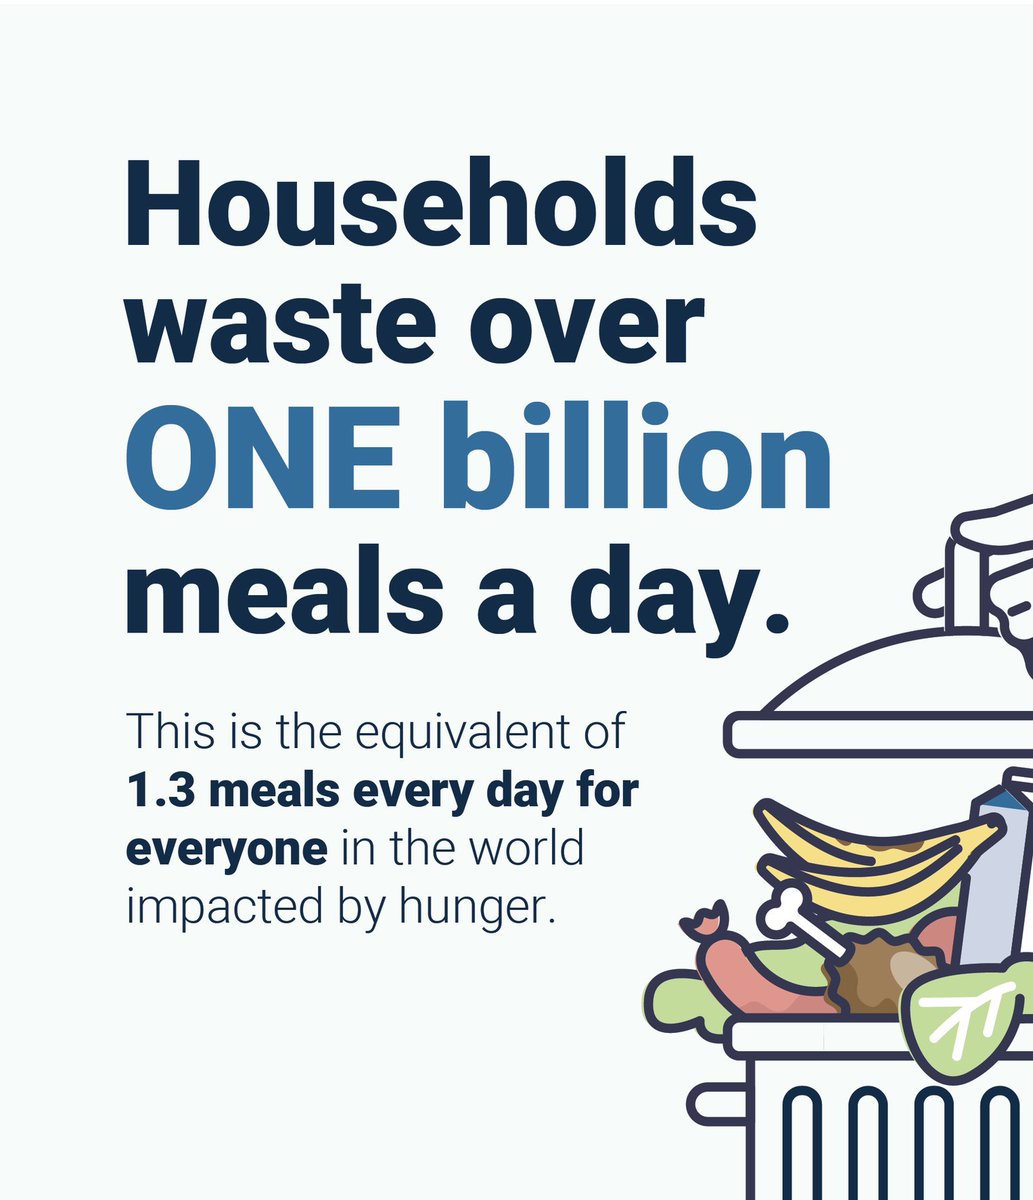 #EndFoodWaste The global food waste crisis demands urgent attention, as over 1 billion meals are wasted daily, while 783 million people suffer from hunger worldwide. This staggering scale of waste not only represents a moral failure but also an economic loss exceeding $1 trillion